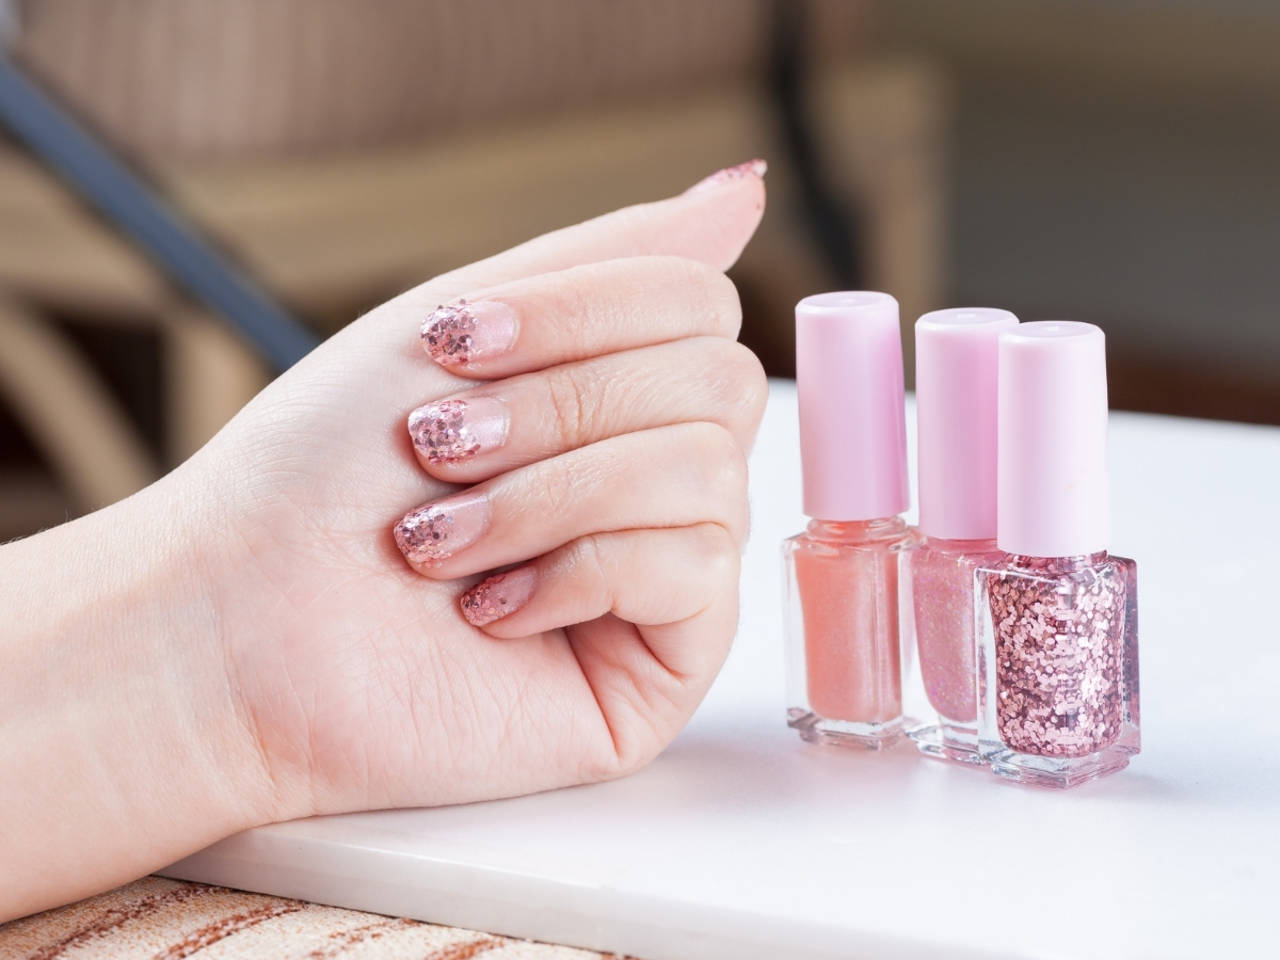 Excellent tips to make your nail paint last longer - Times of India